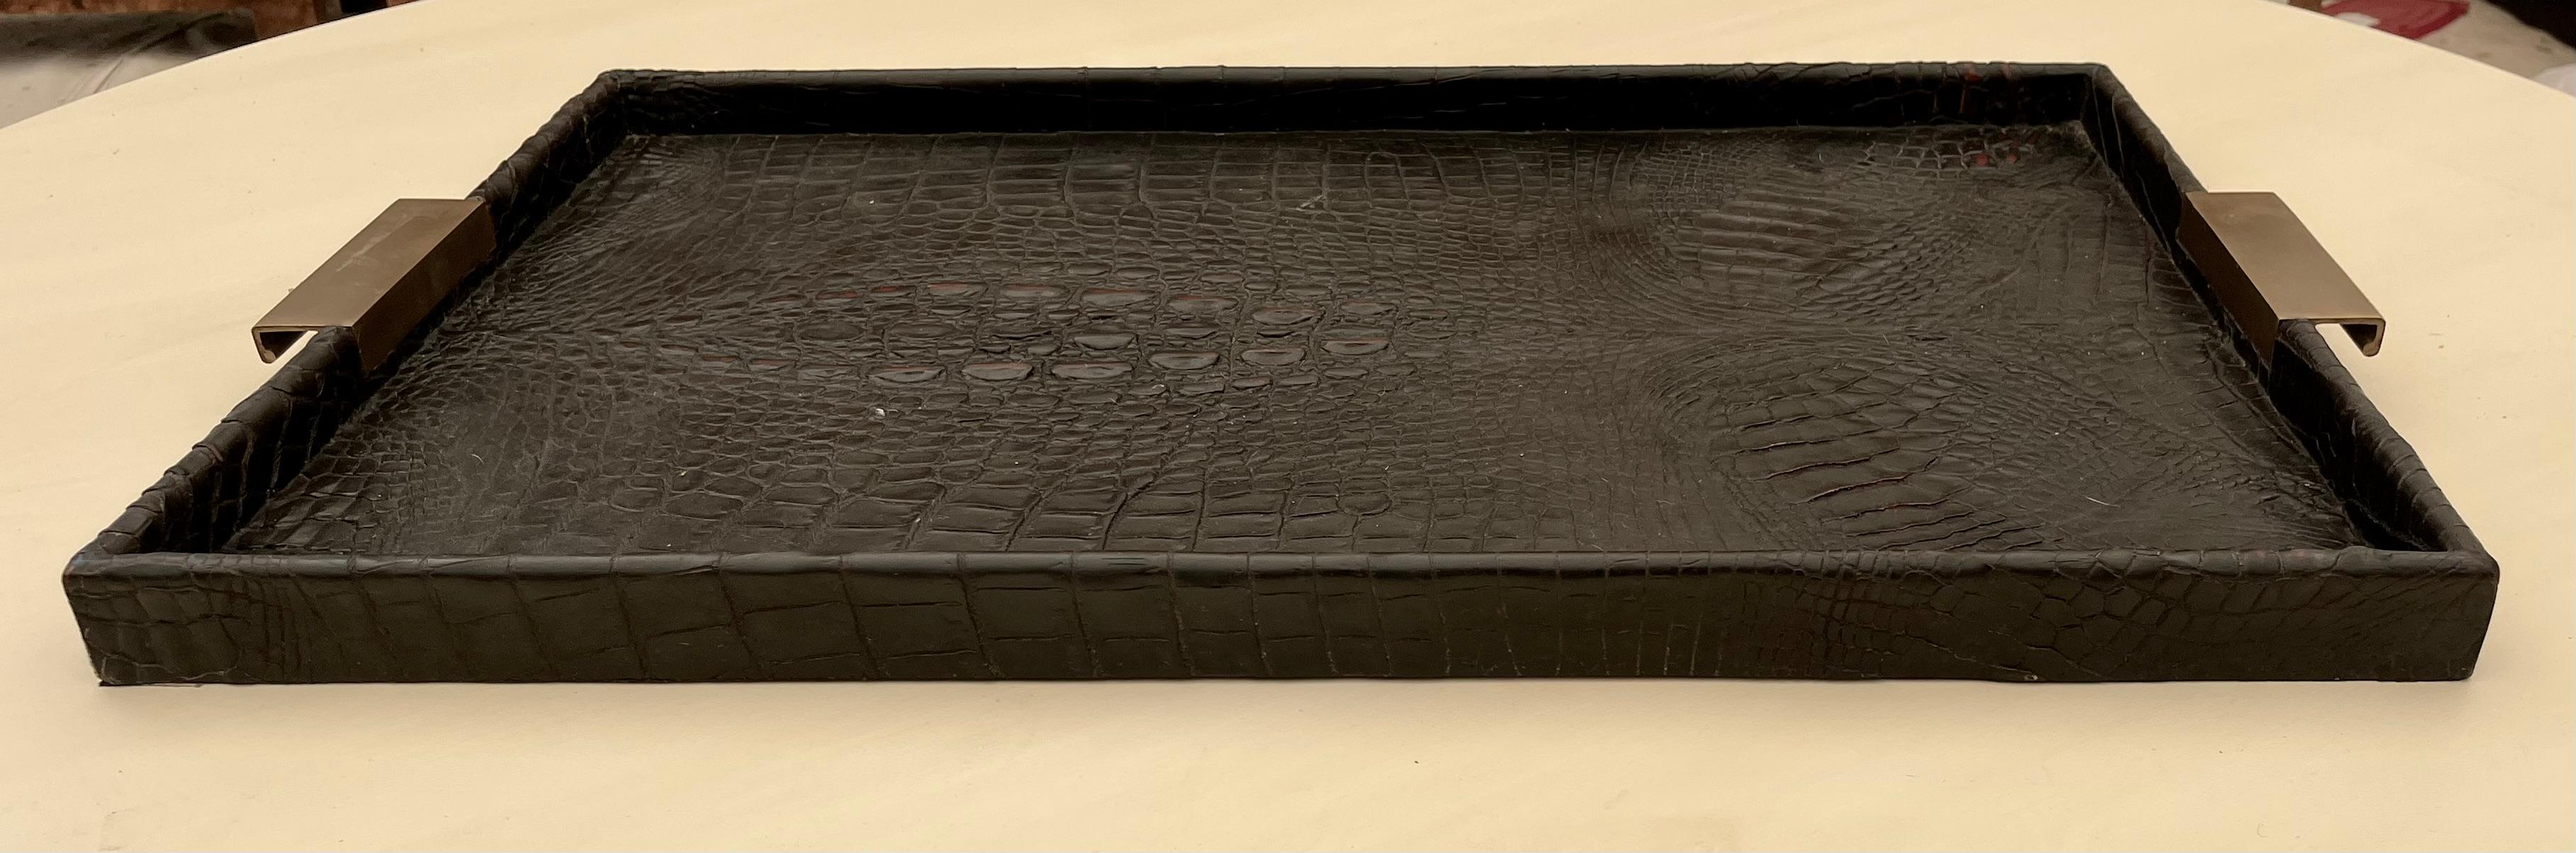 20th Century Vintage Leather Crocodile Skin Tray with Brass Handles